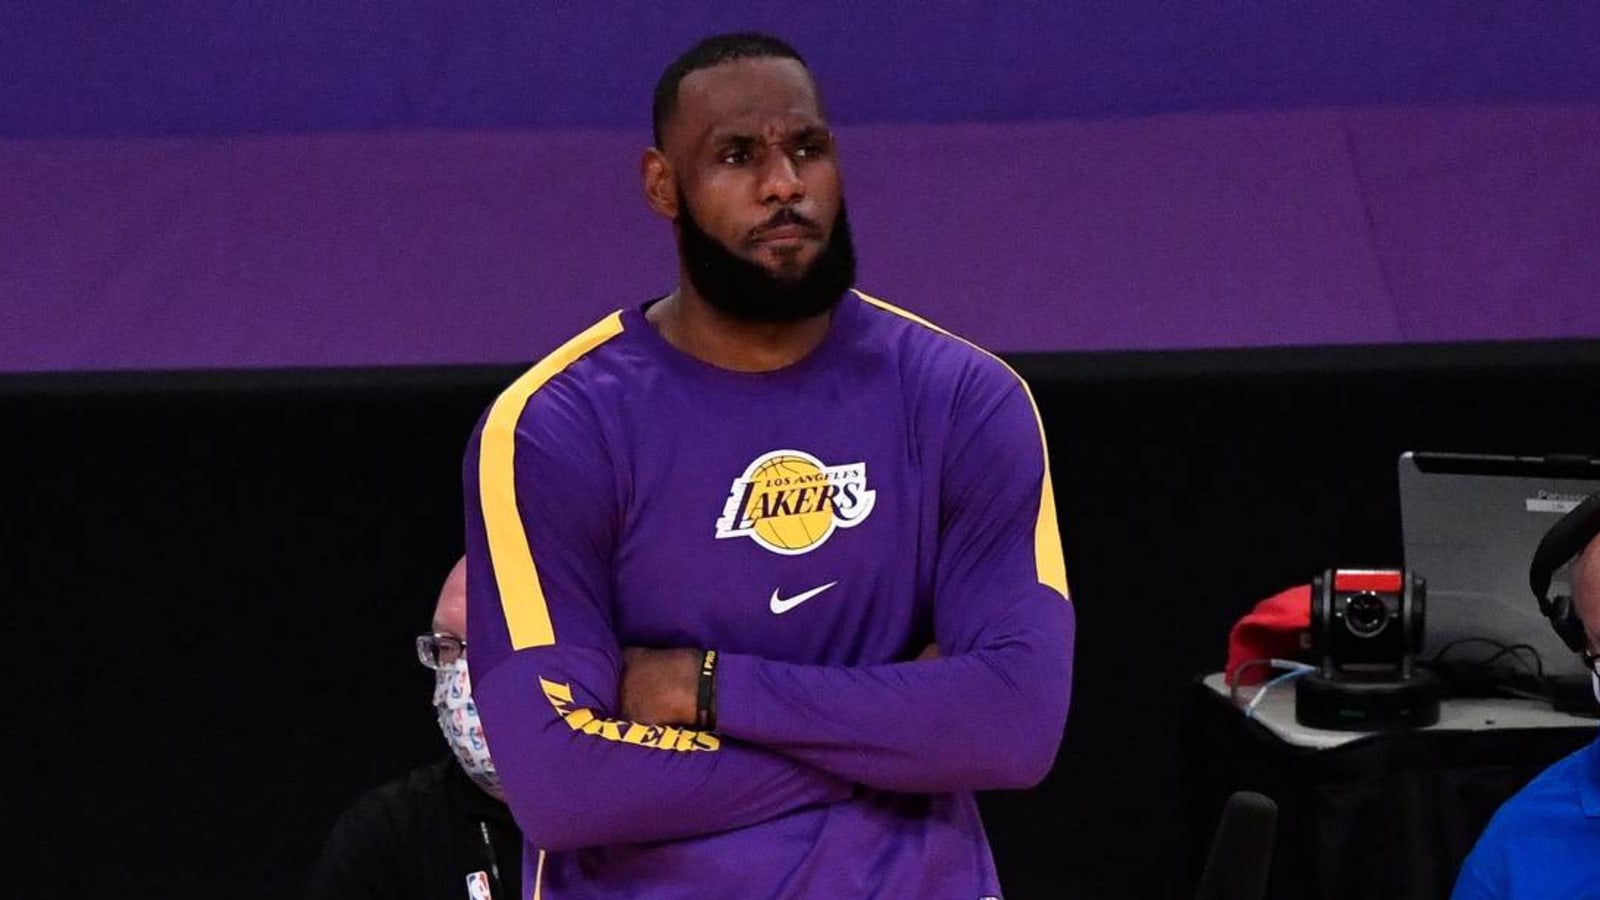 Lakers' LeBron James out Tuesday vs. Knicks to rest ankle